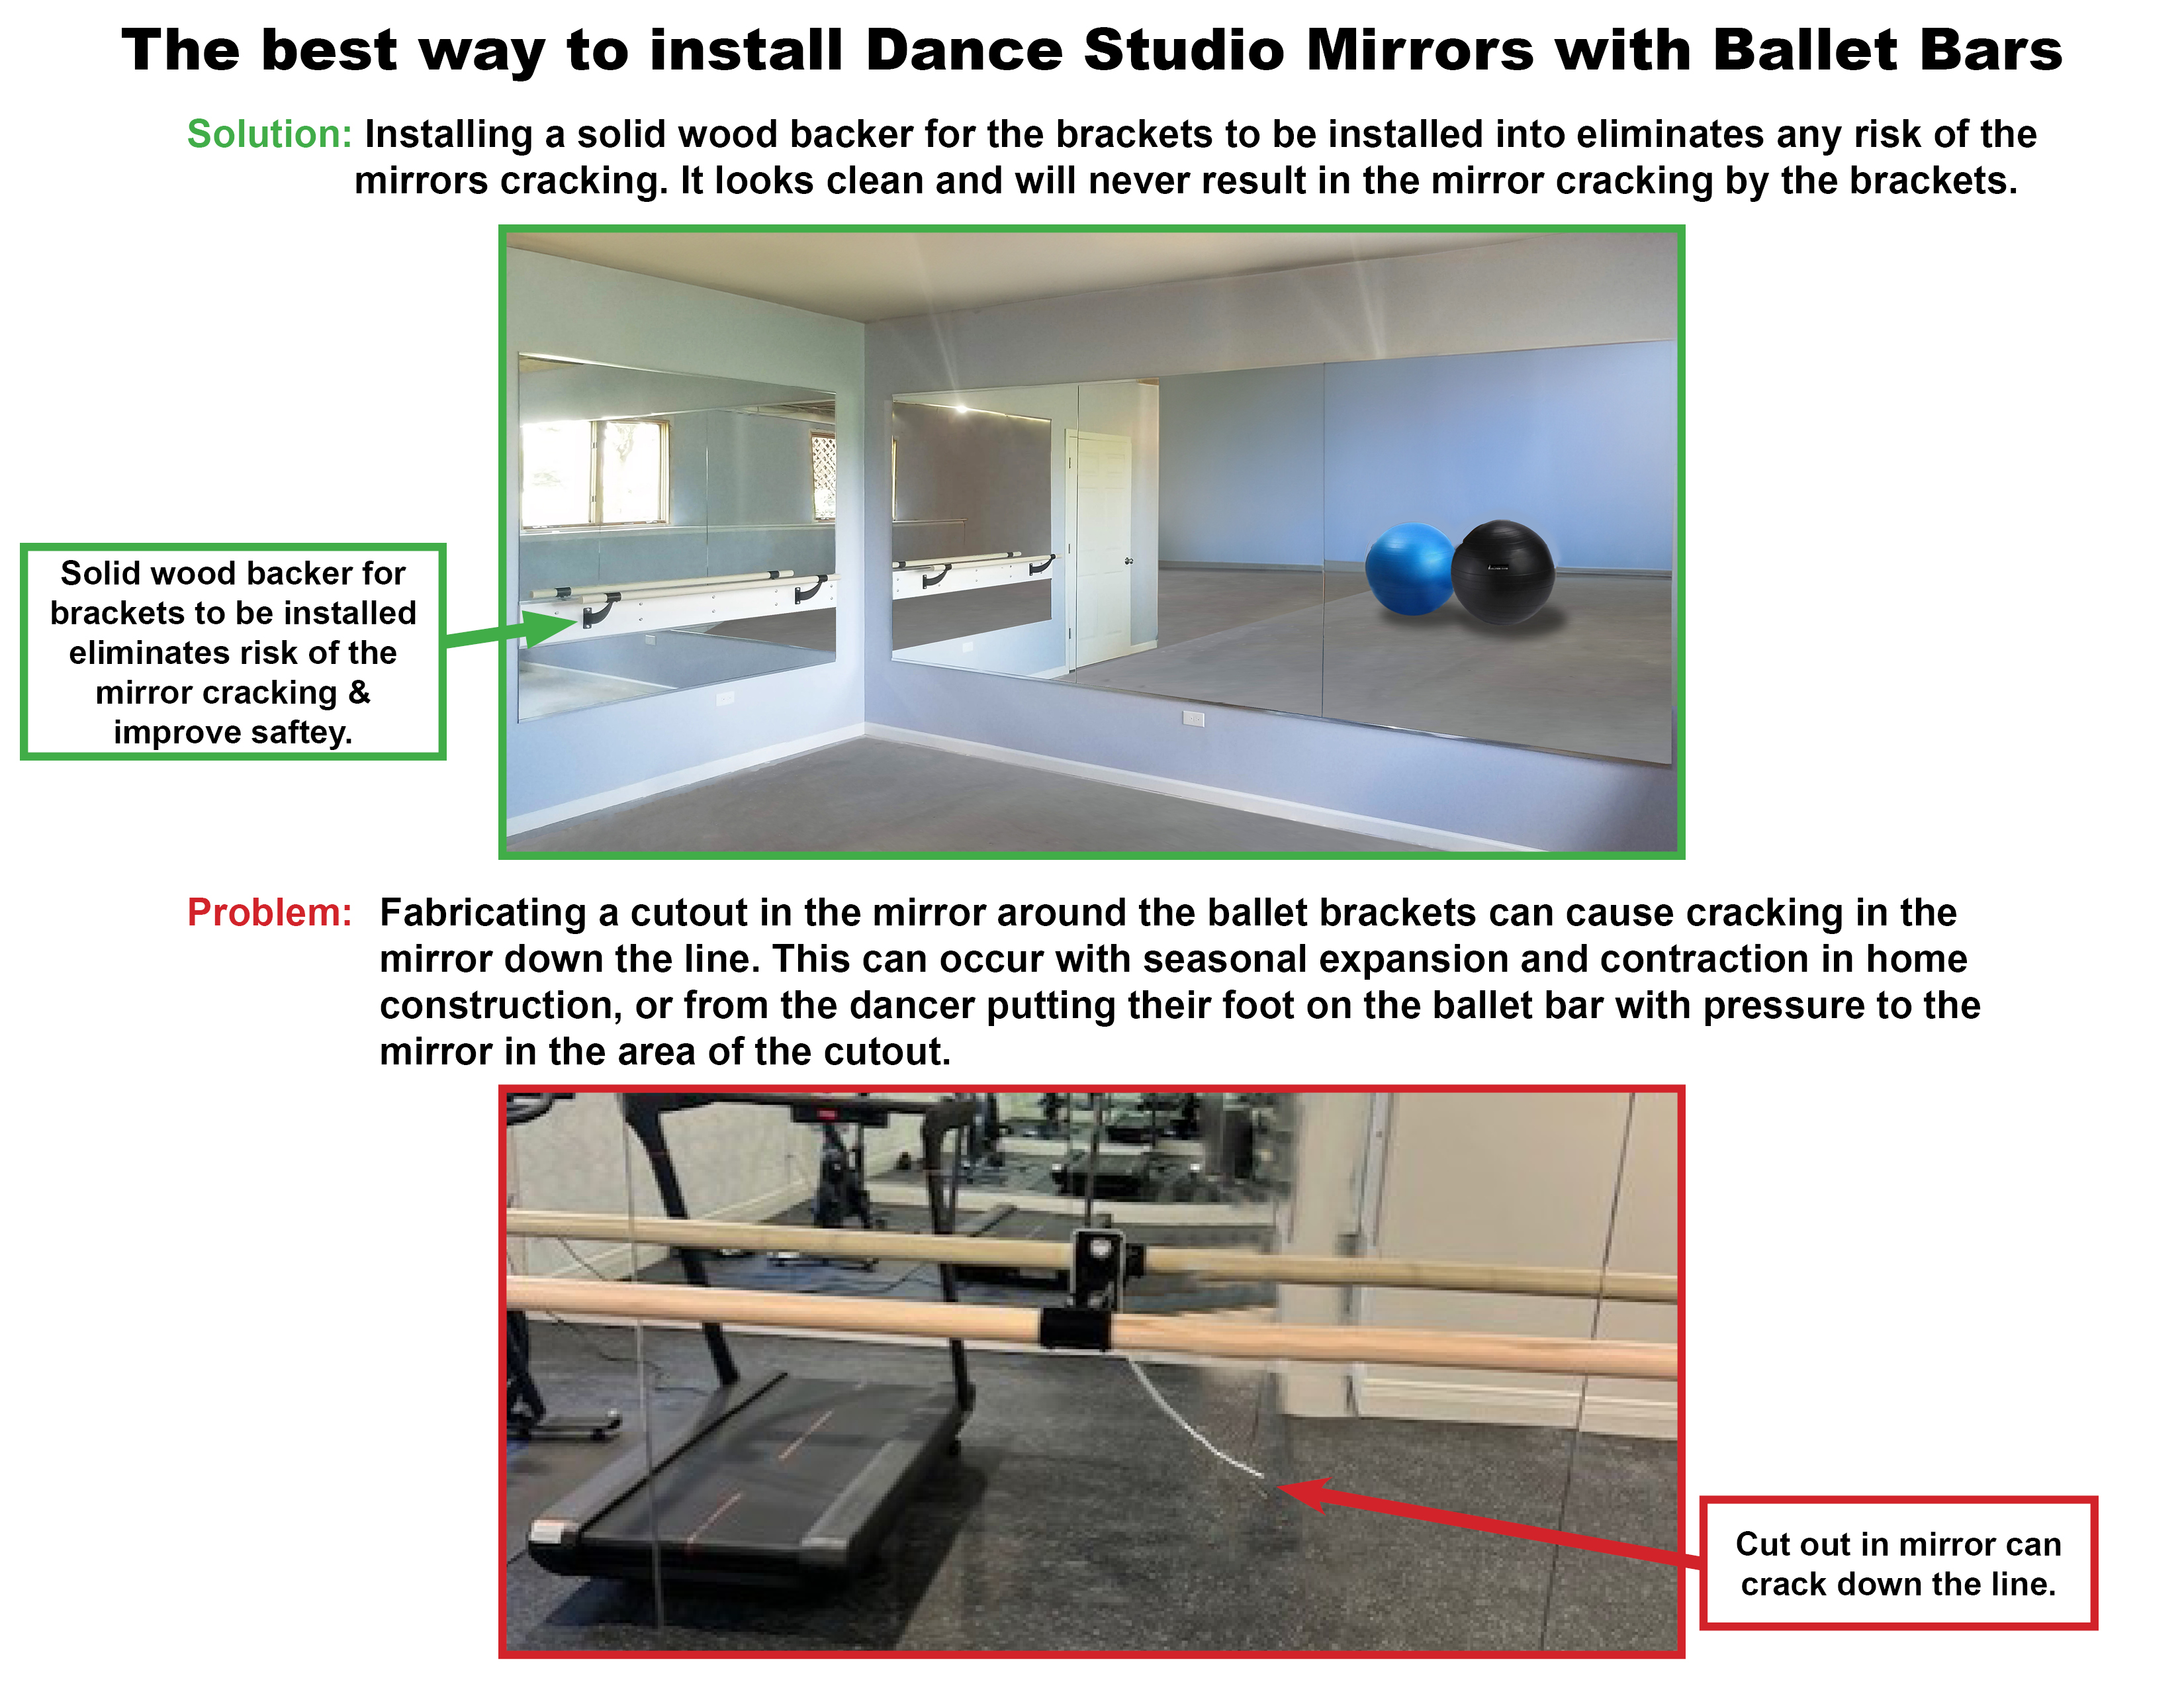 The best way to install Dance Studio Mirrors with Ballet Bars